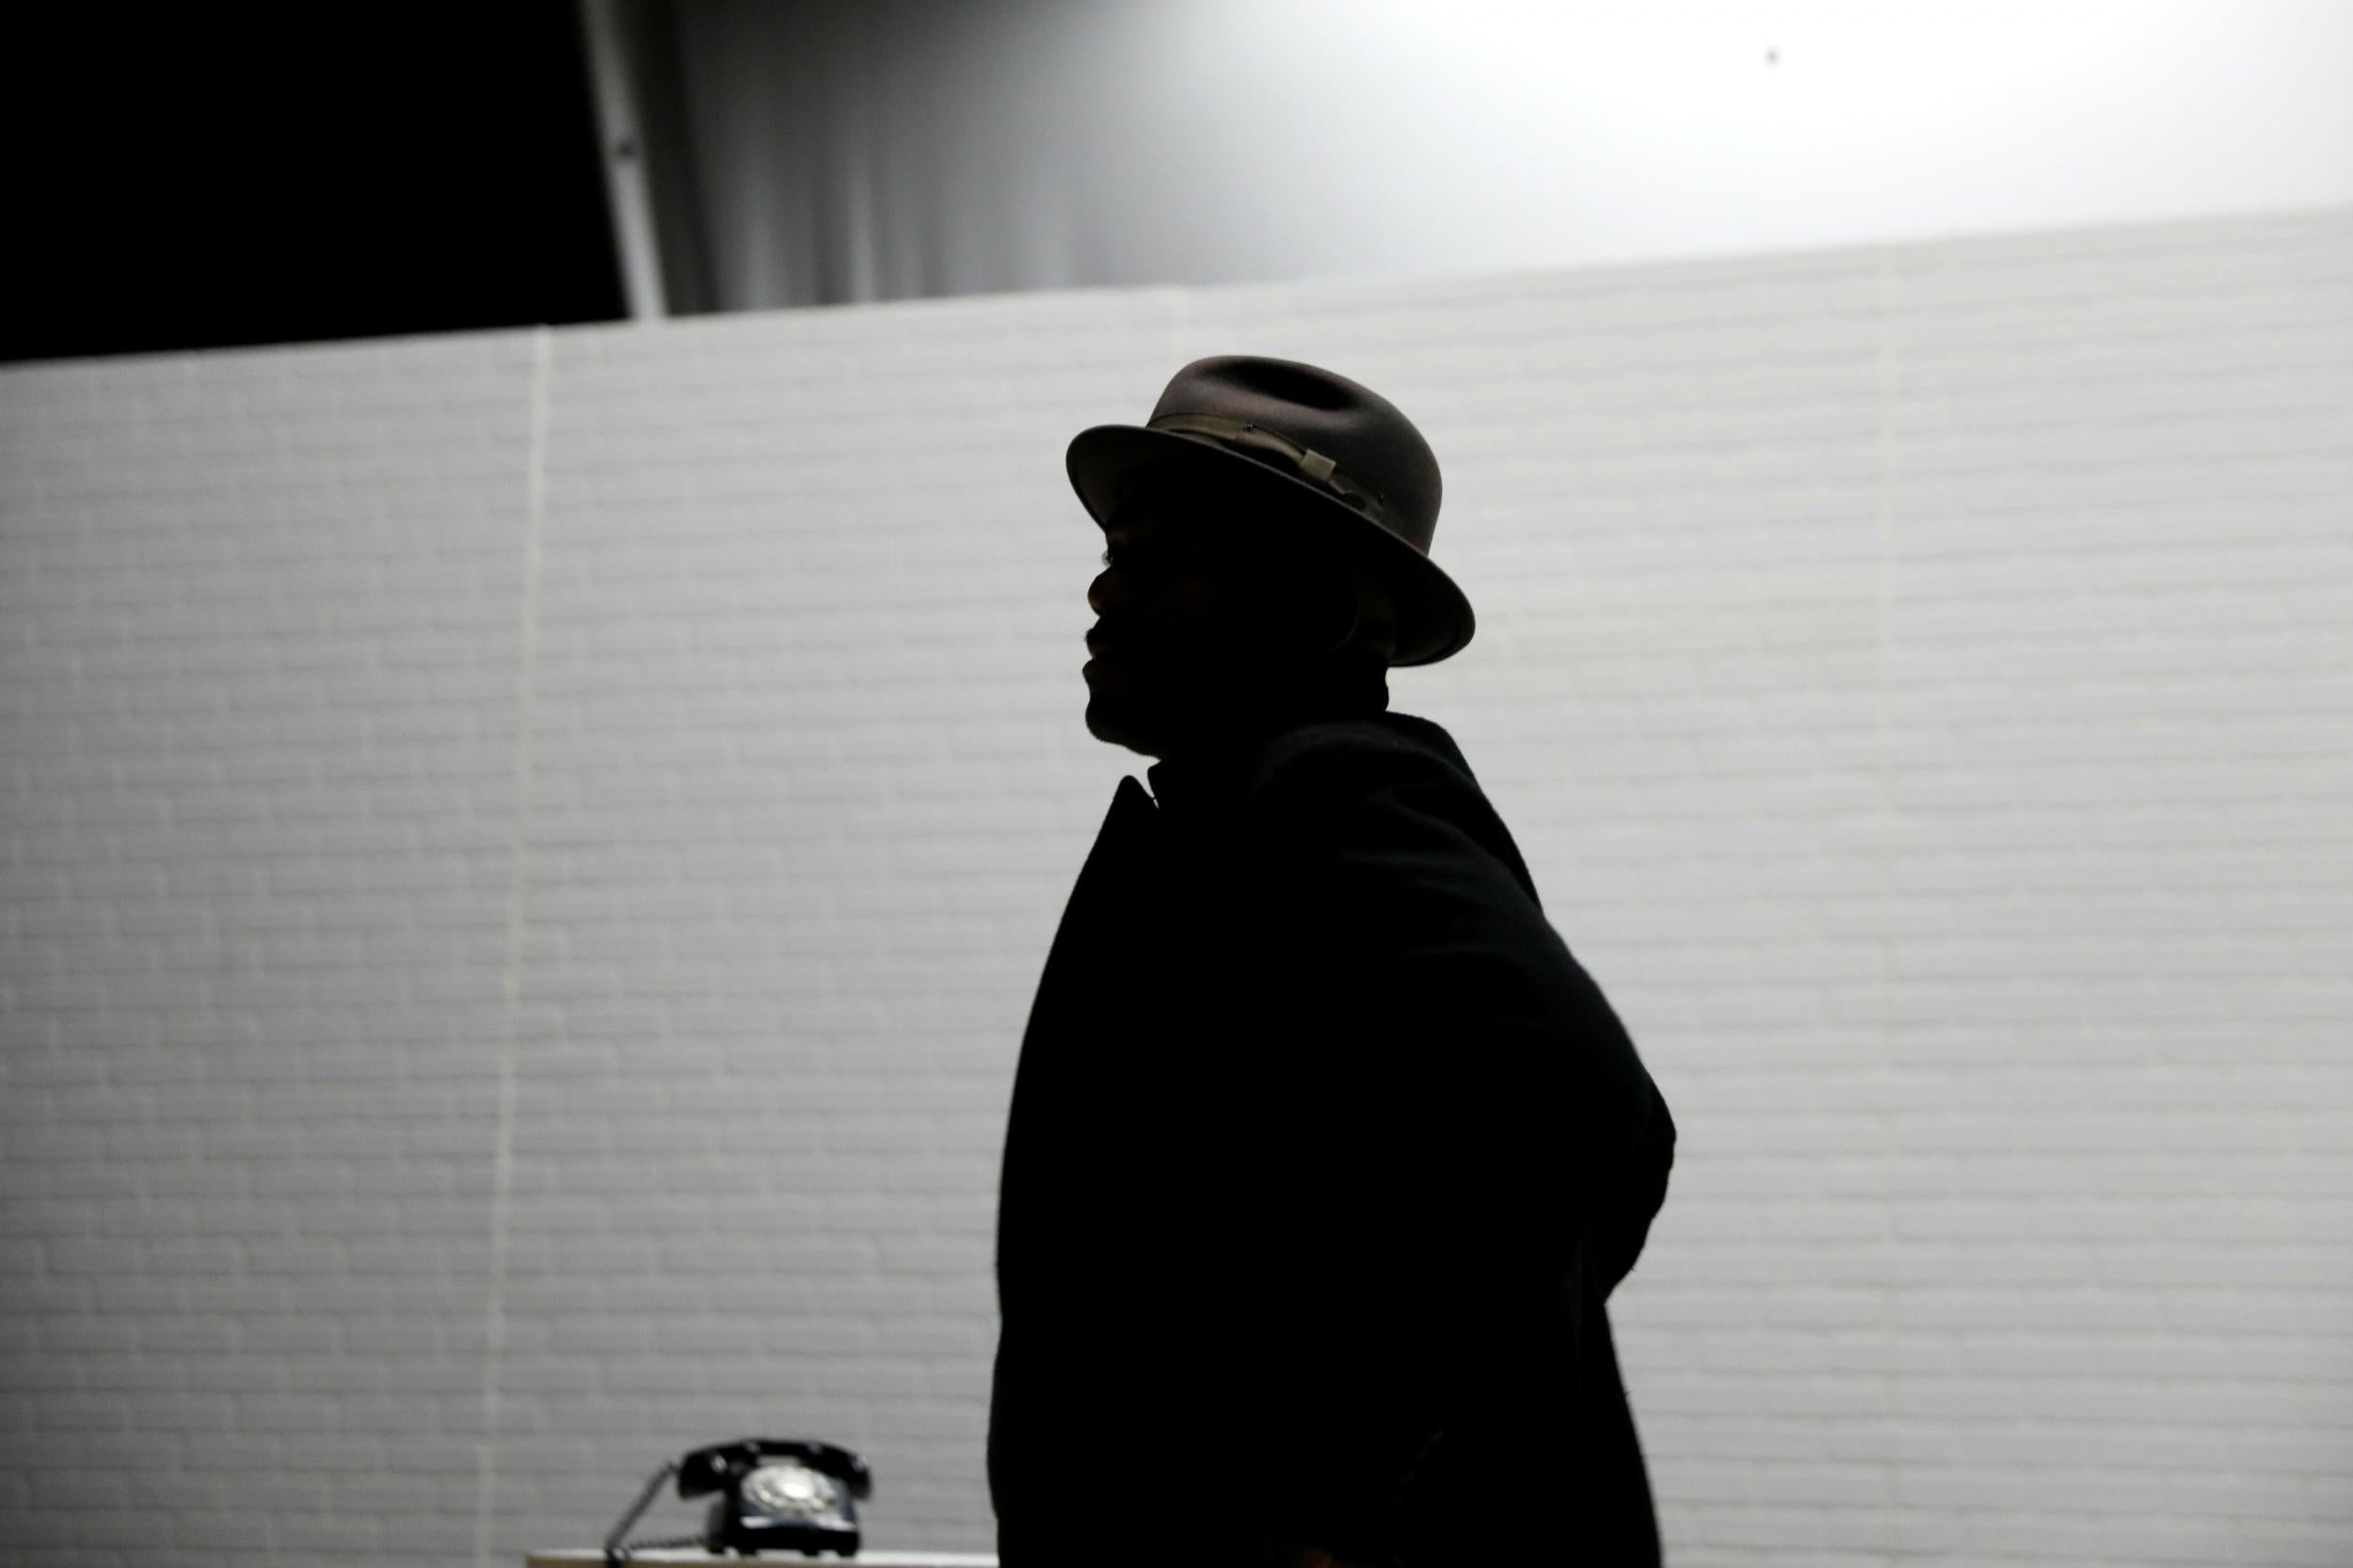 Actor Larry Bates recreates King in a scene from the play ‘The Mountaintop’, part of events marking the 50th anniversary of the civil rights leader’s murder